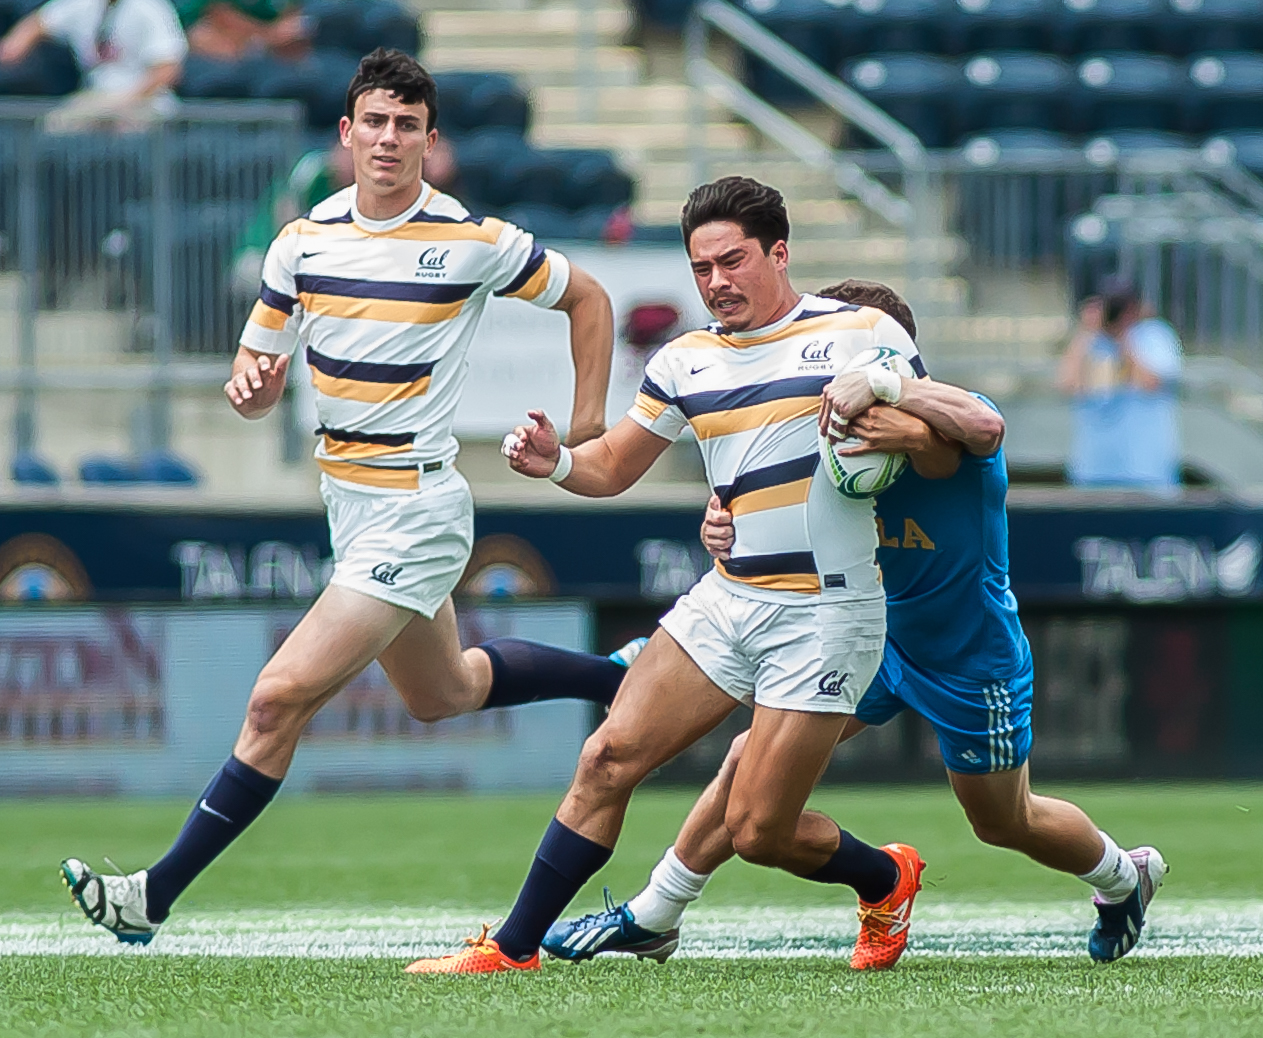 2016 CRC - Photos by Colleen McCloskey for Goff Rugby Report